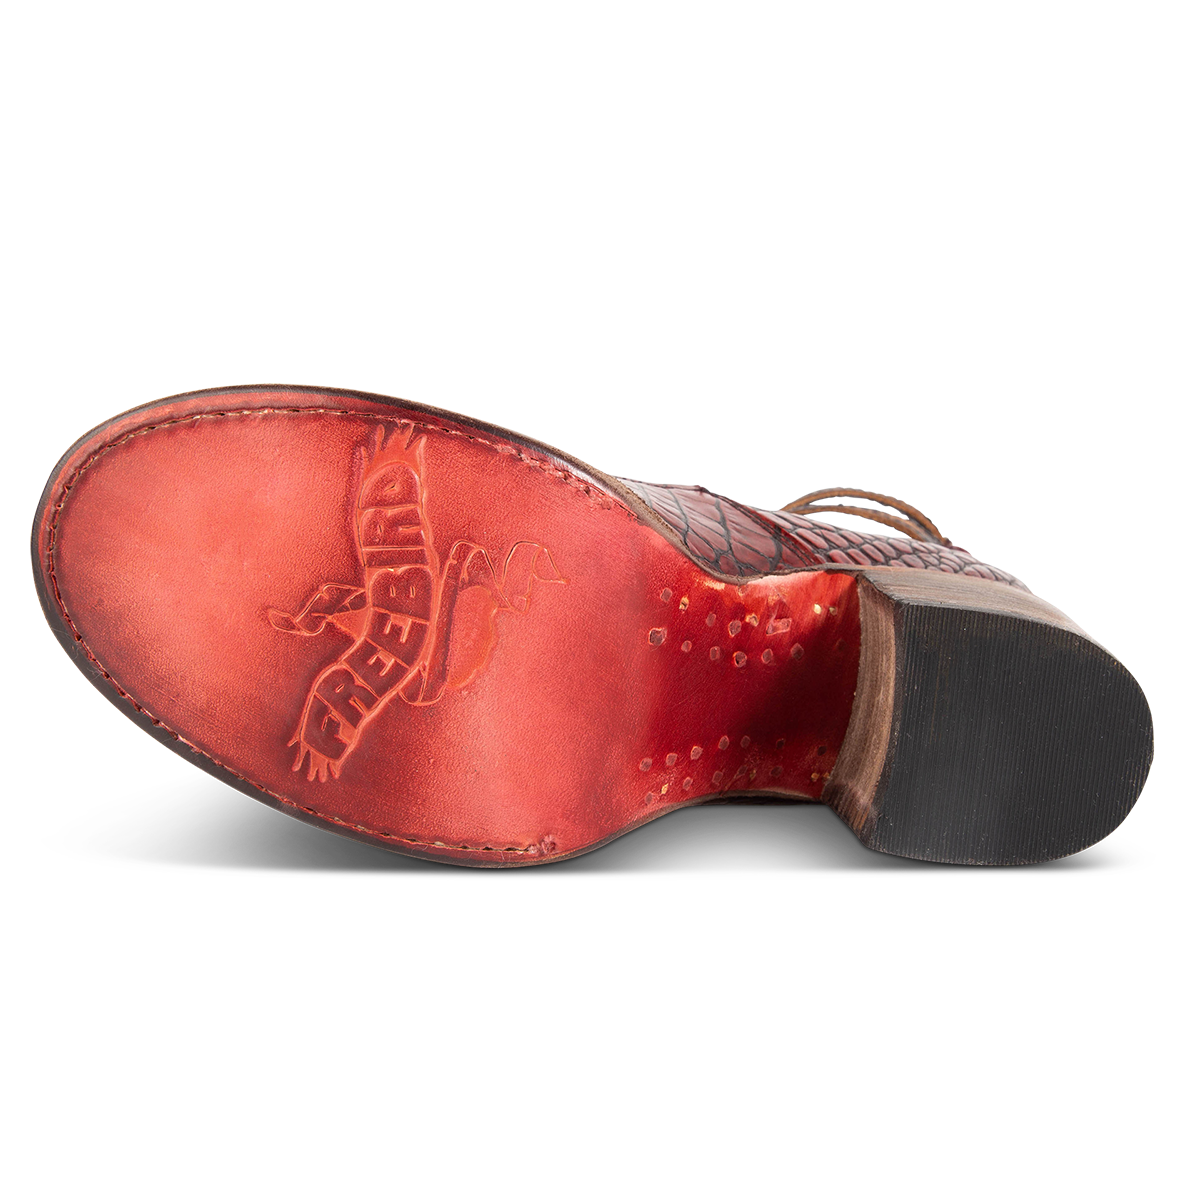 Leather sole imprinted with FREEBIRD on women’s Randi red croco leather shoe